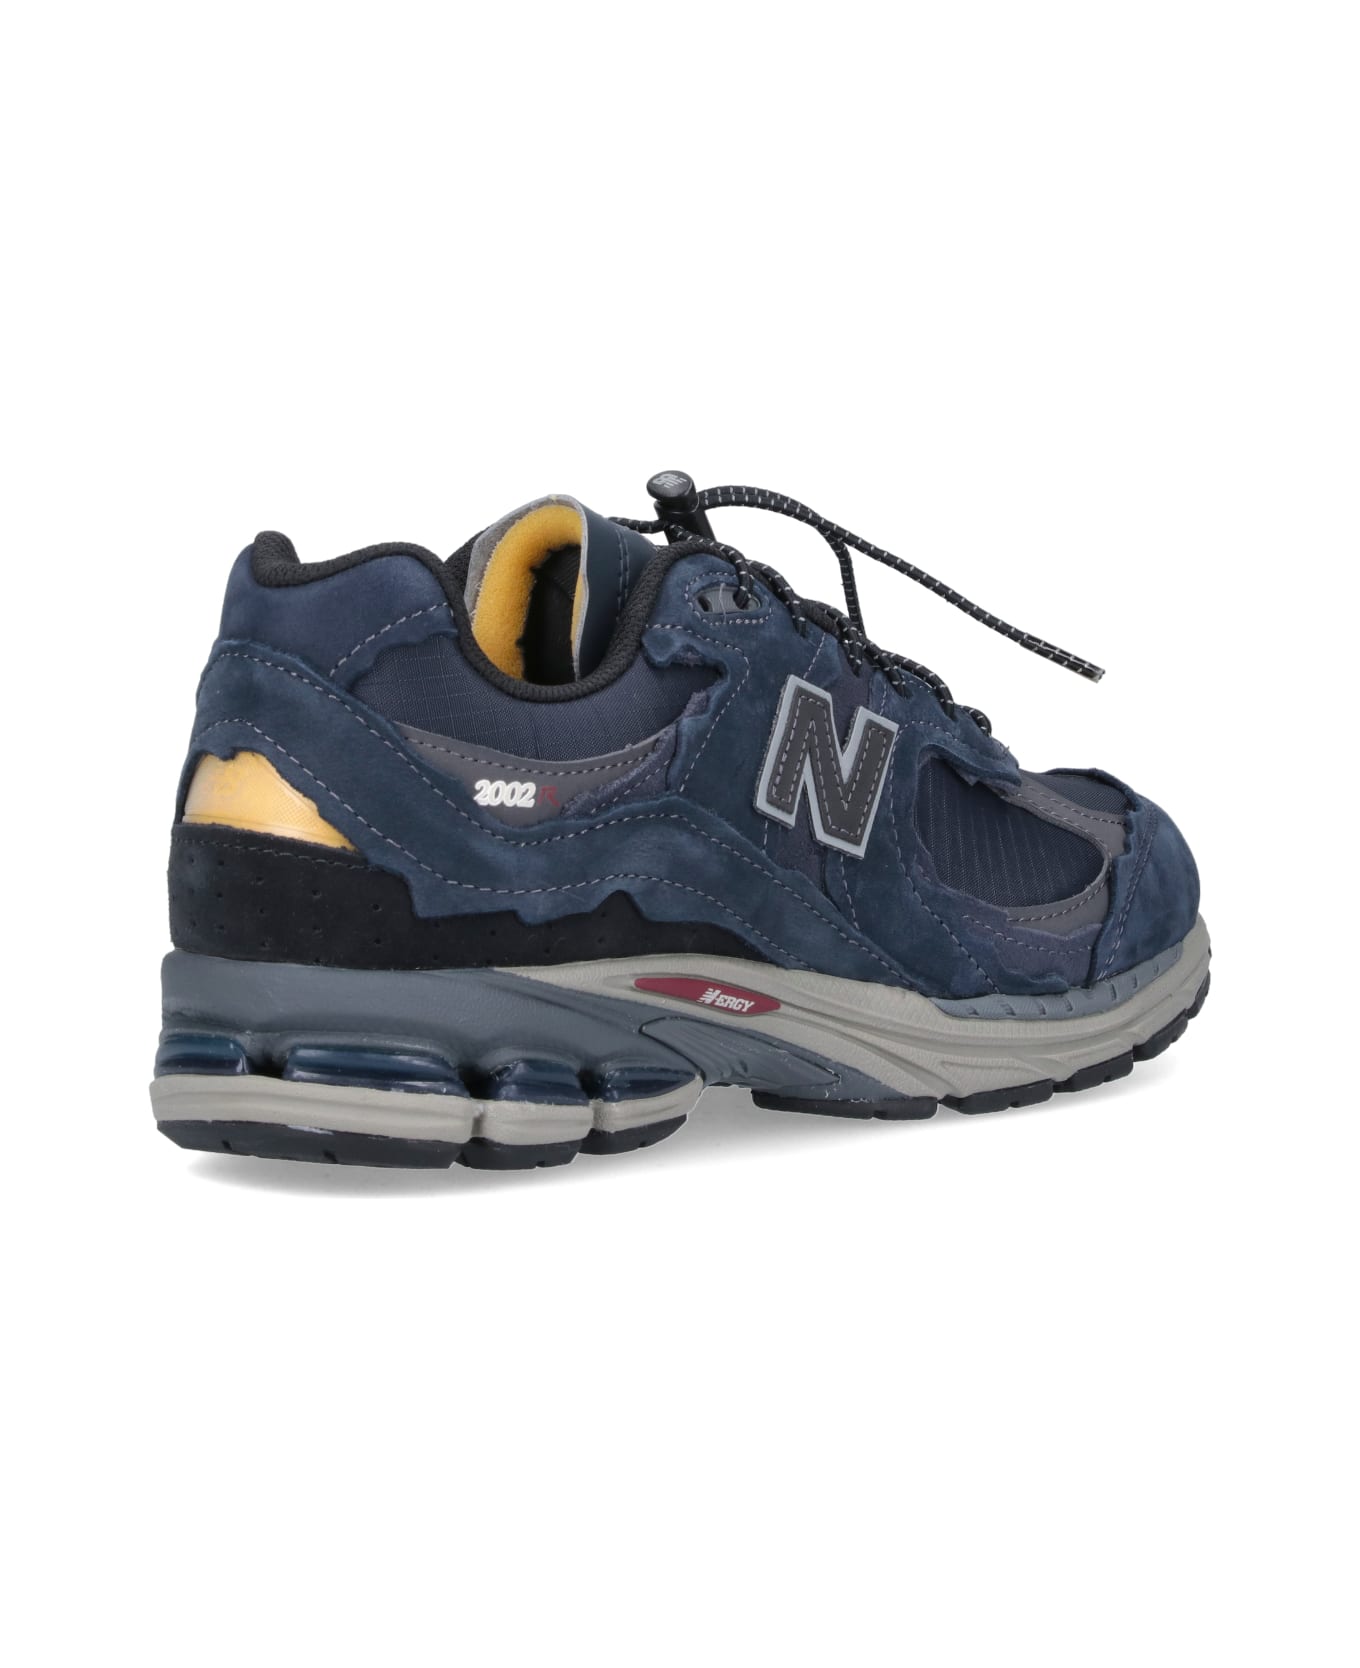 New Balance "2002r Protection Pack" Sneakers - Blue